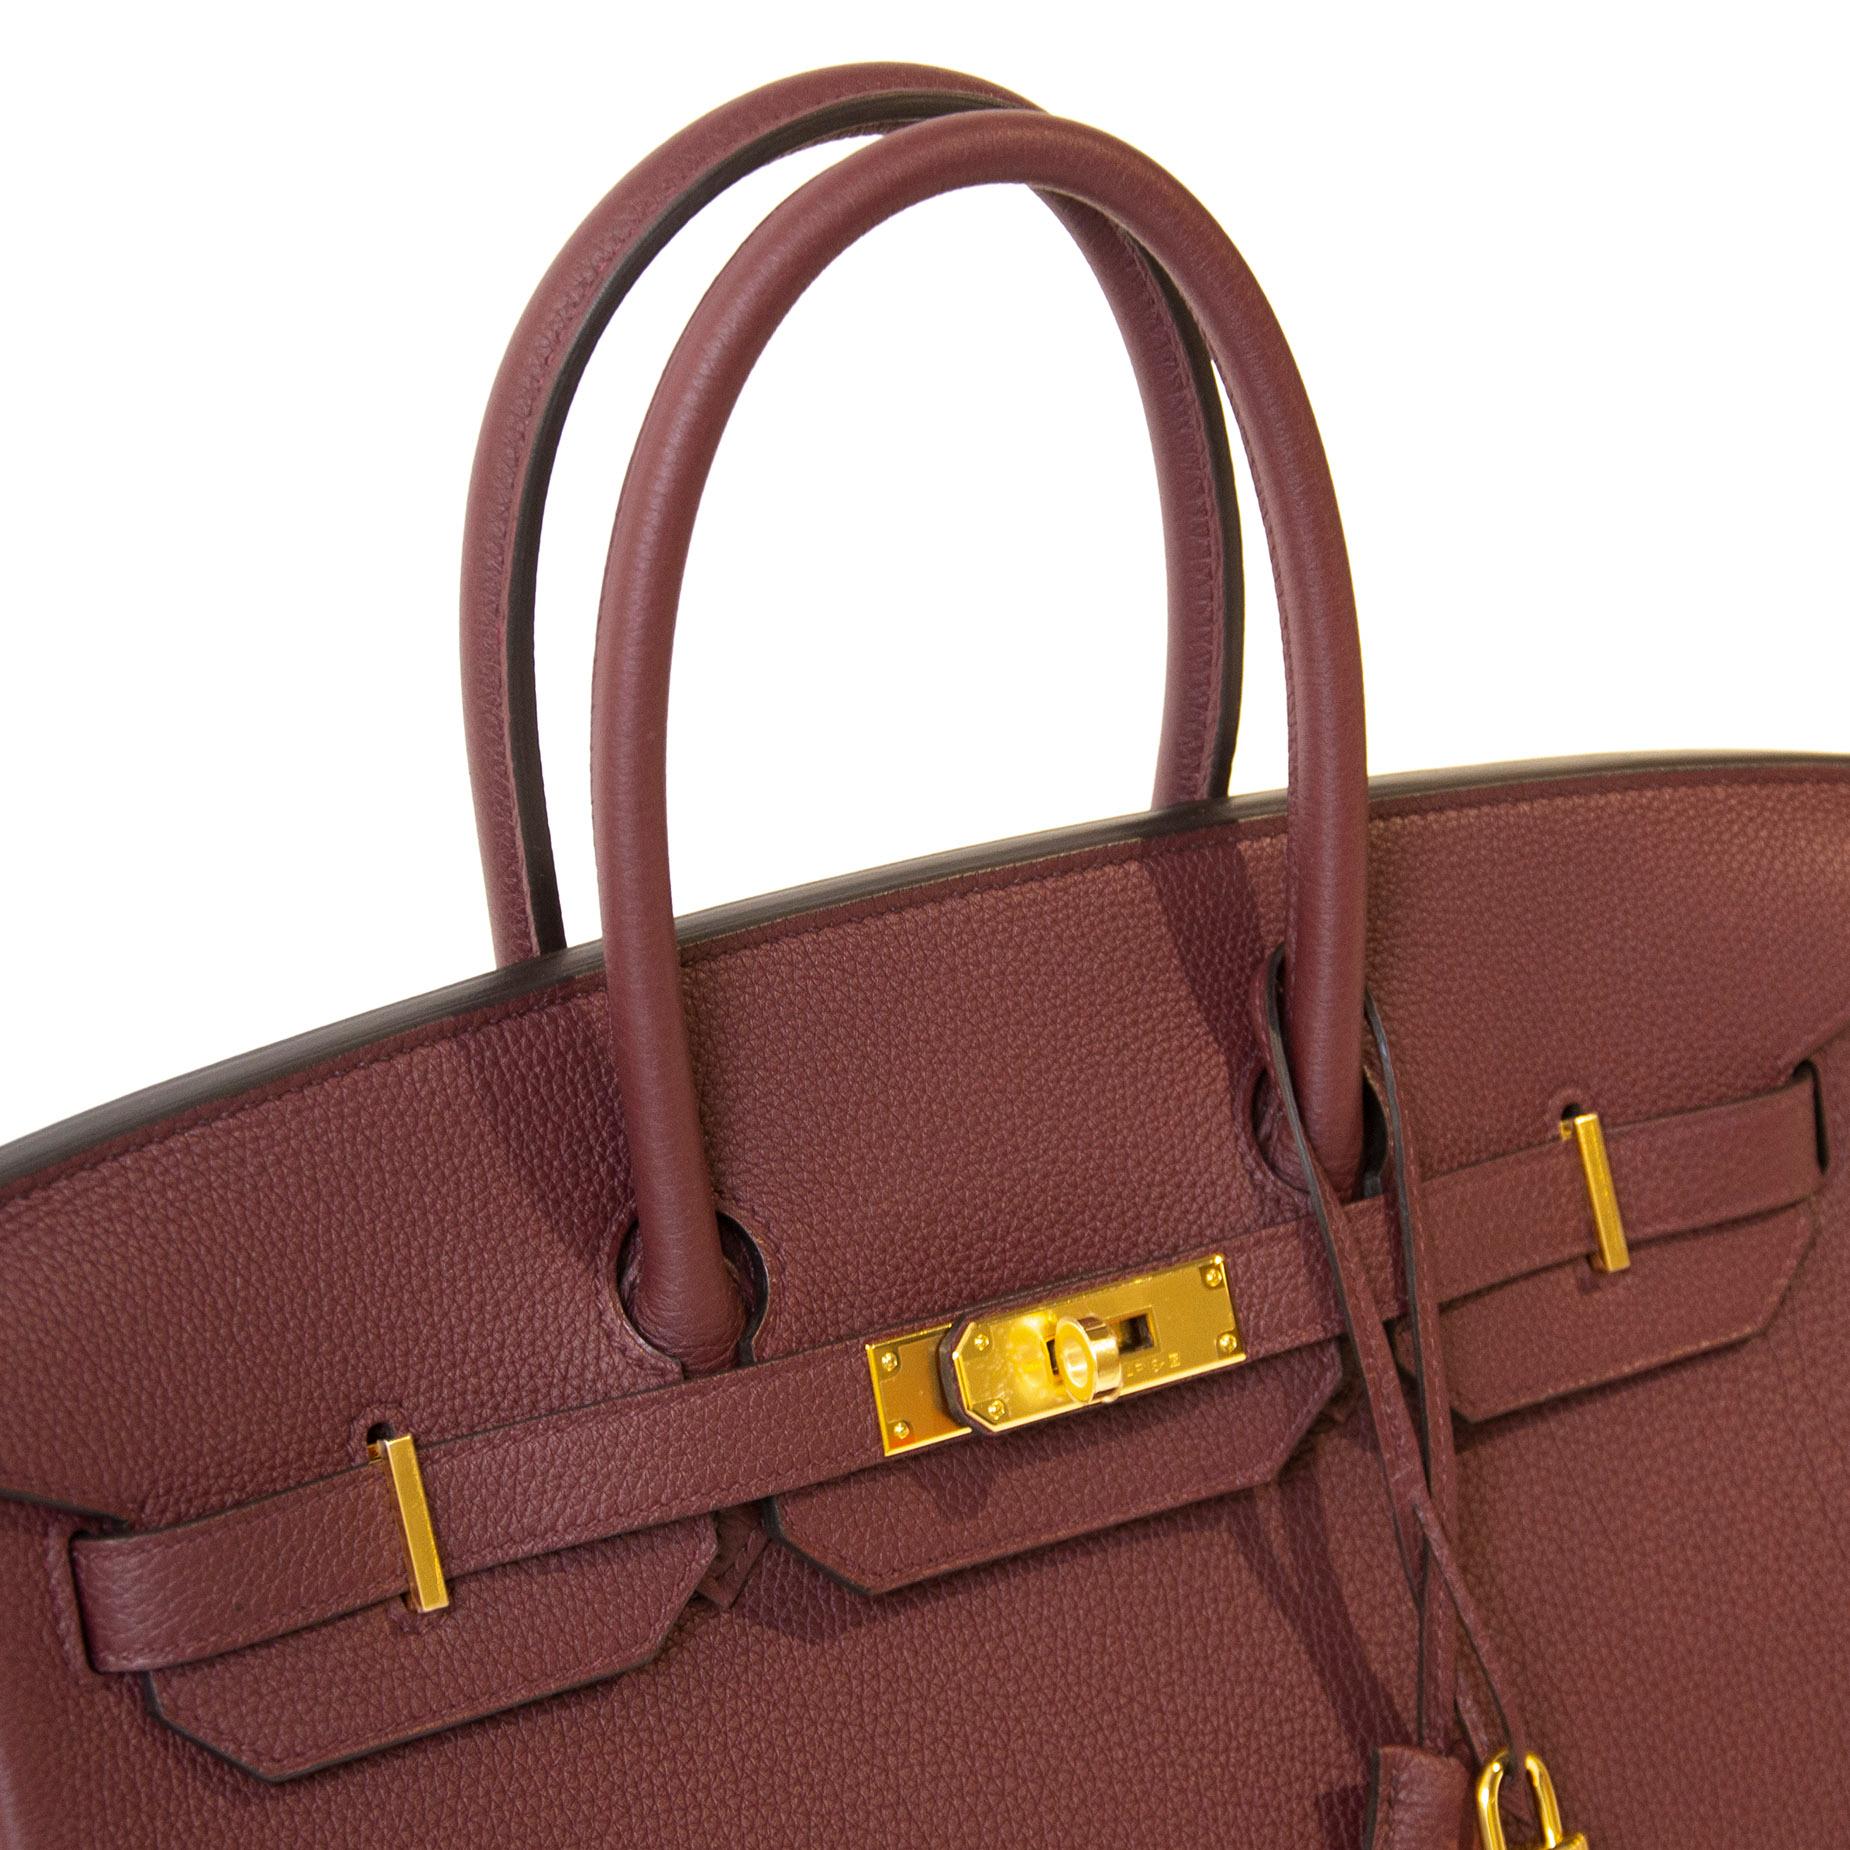 This beautiful and brand new Hermès Birkin bag in the size 45 is crafted out of luxurious Togo leather and comes in a warm burgundy leather called 'Bordeaux'. This Birkin bag has gold toned hardware.

Comes with: FULL SET

    dust bag
    box
   